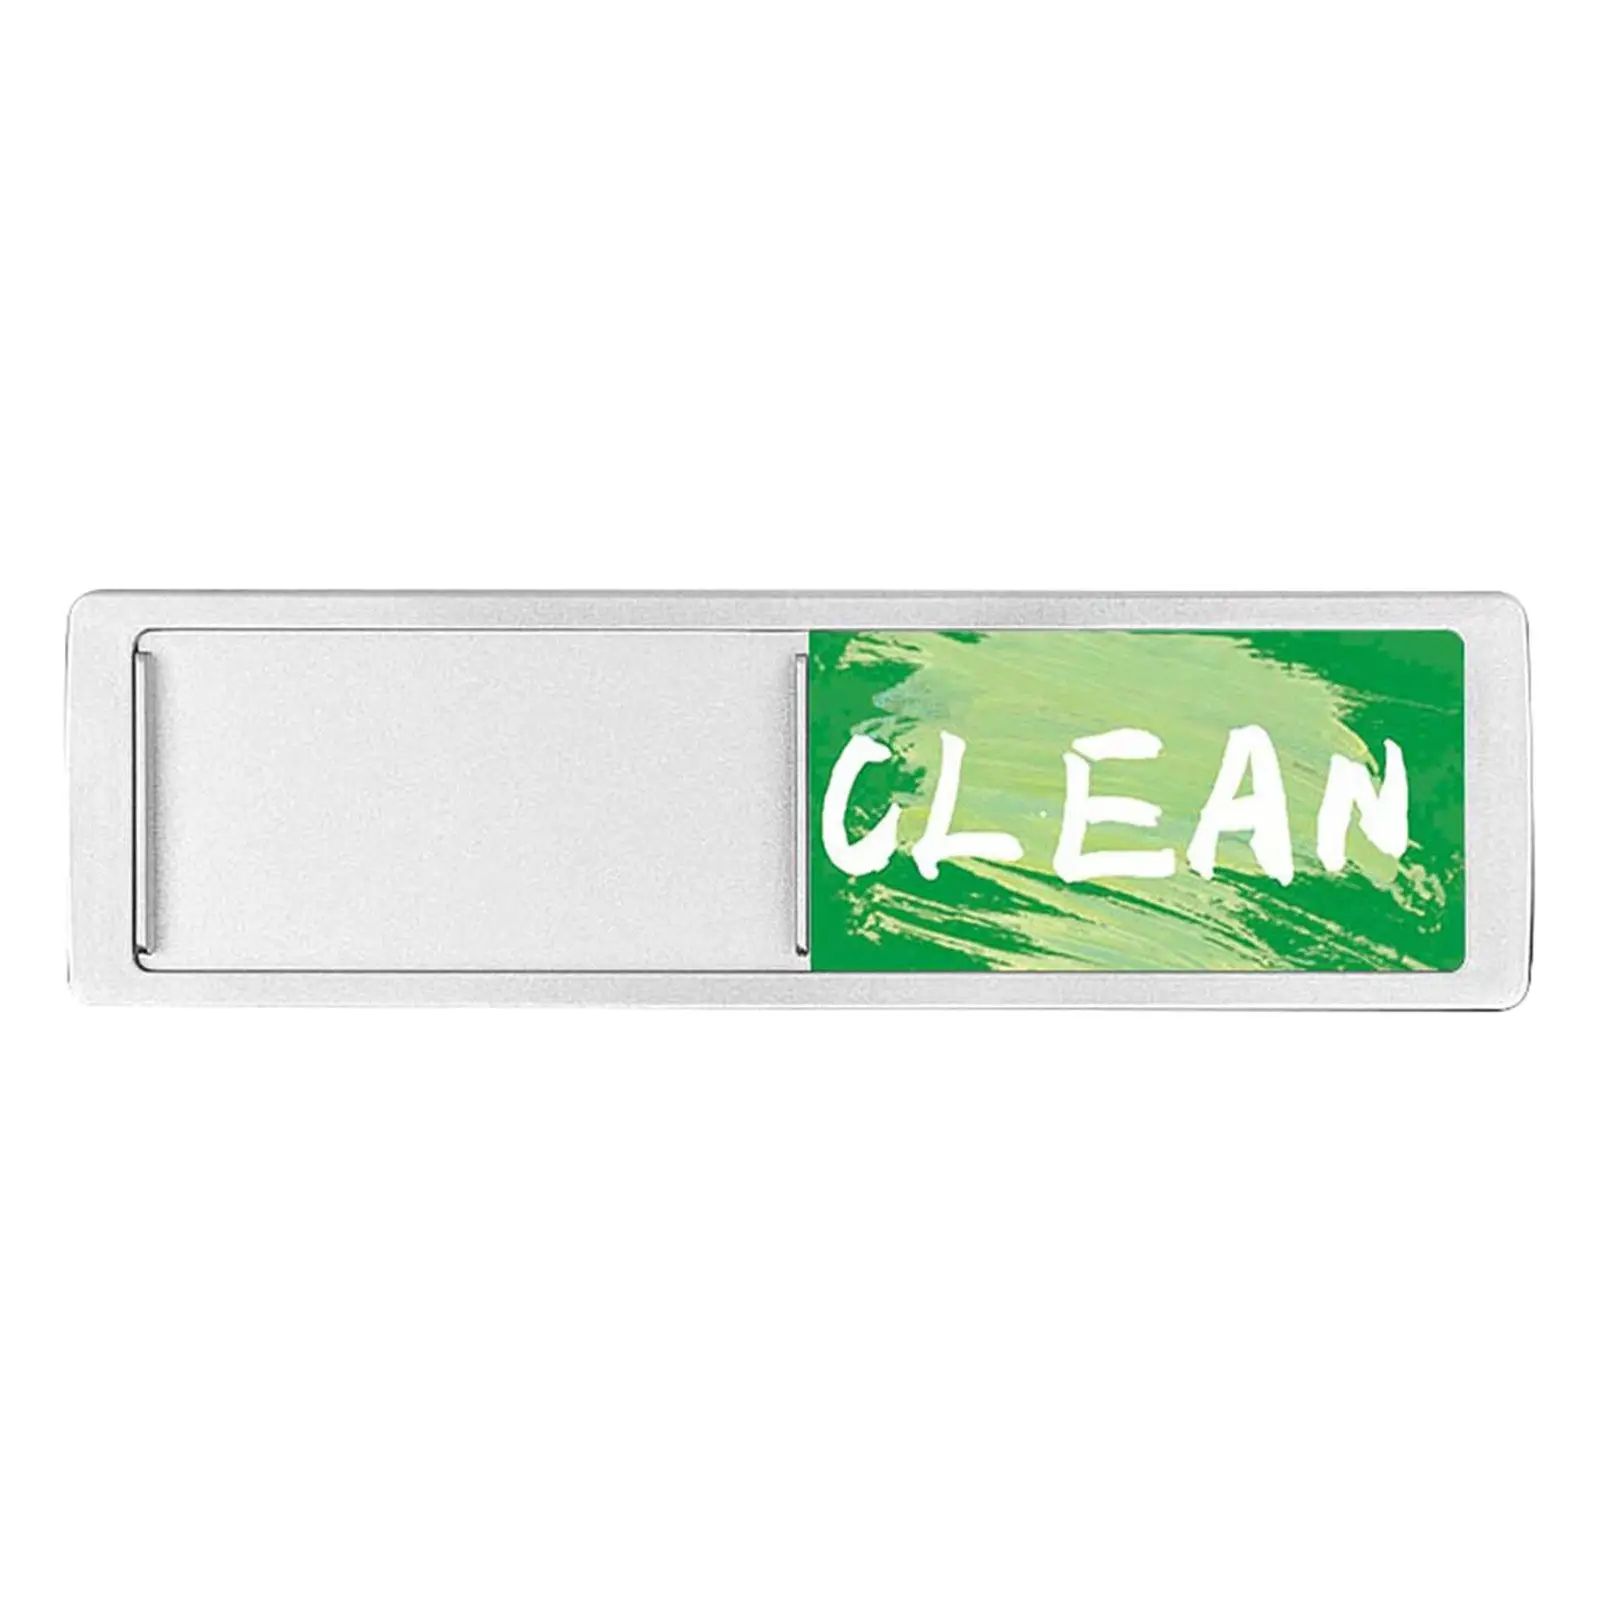 Double Sided Dishwasher Clean Dirty Sign Indicator Non Scratching Portable Flip Indicator for Kitchen Organization Apartment